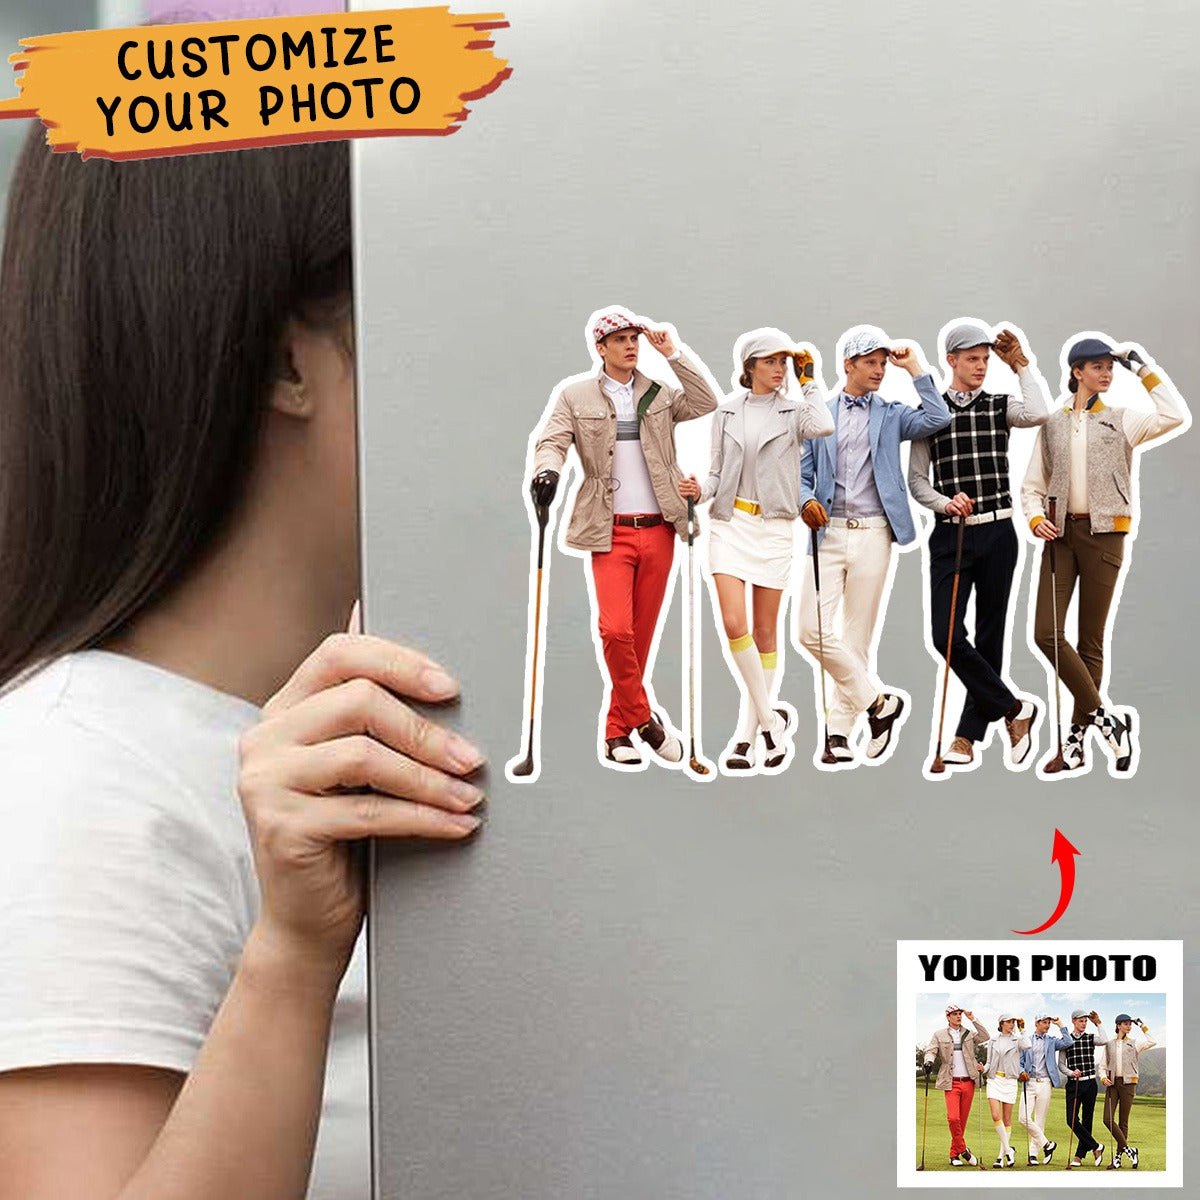 Custom Shaped Photo Golf Lovers - Personalized Photo Decal Sticker